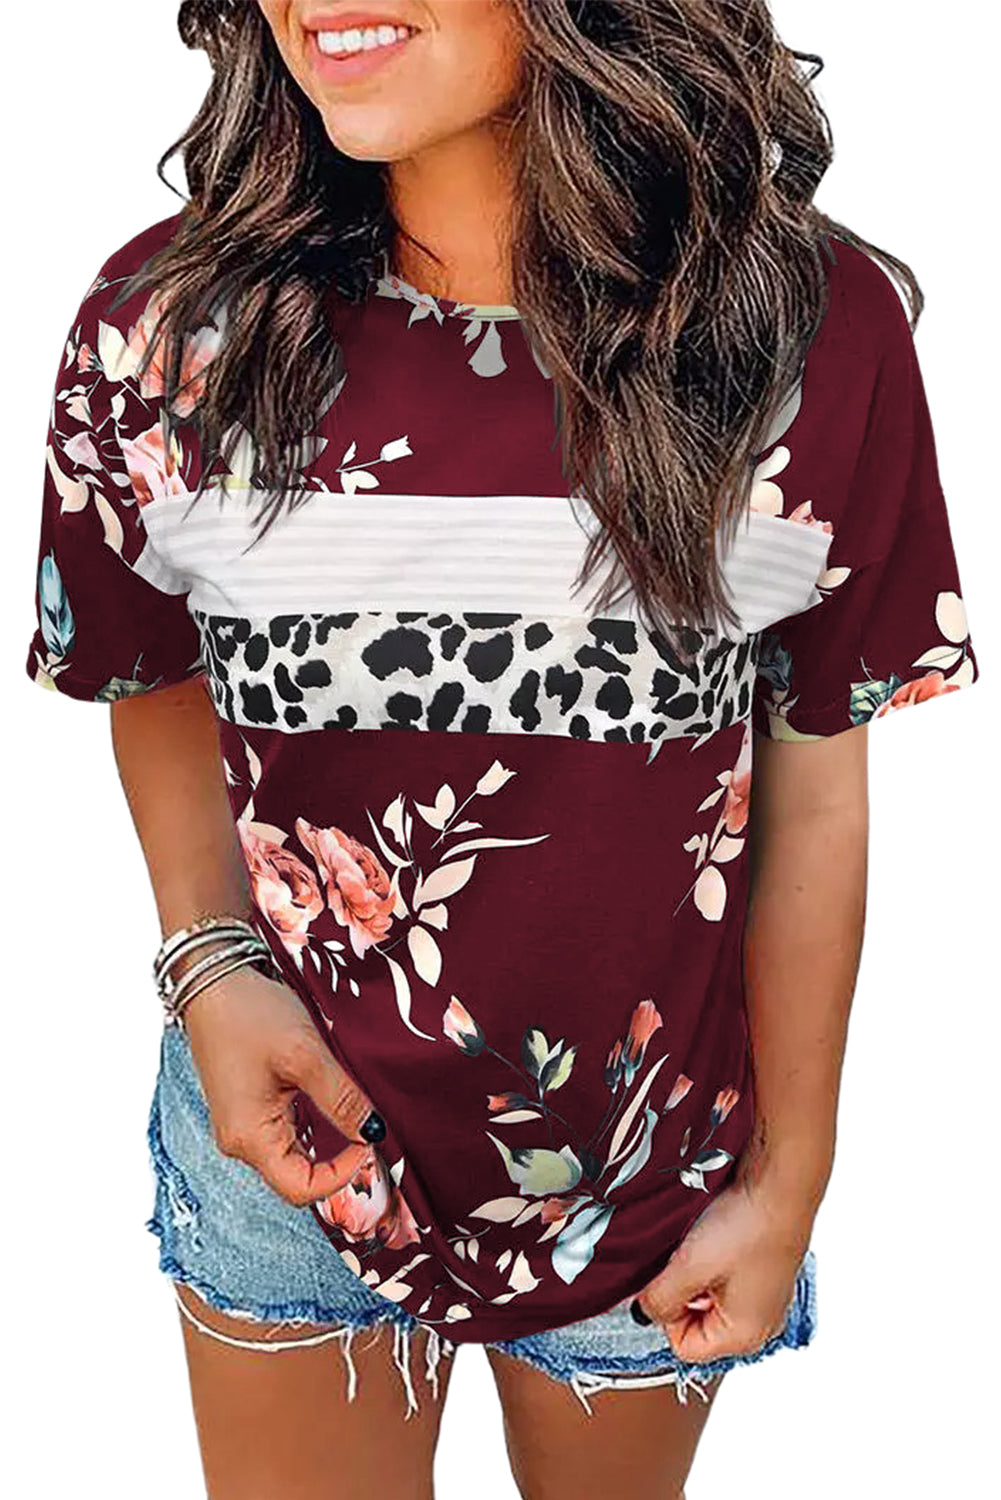 Red Leopard Striped Floral T Shirt Item NO.: 3747